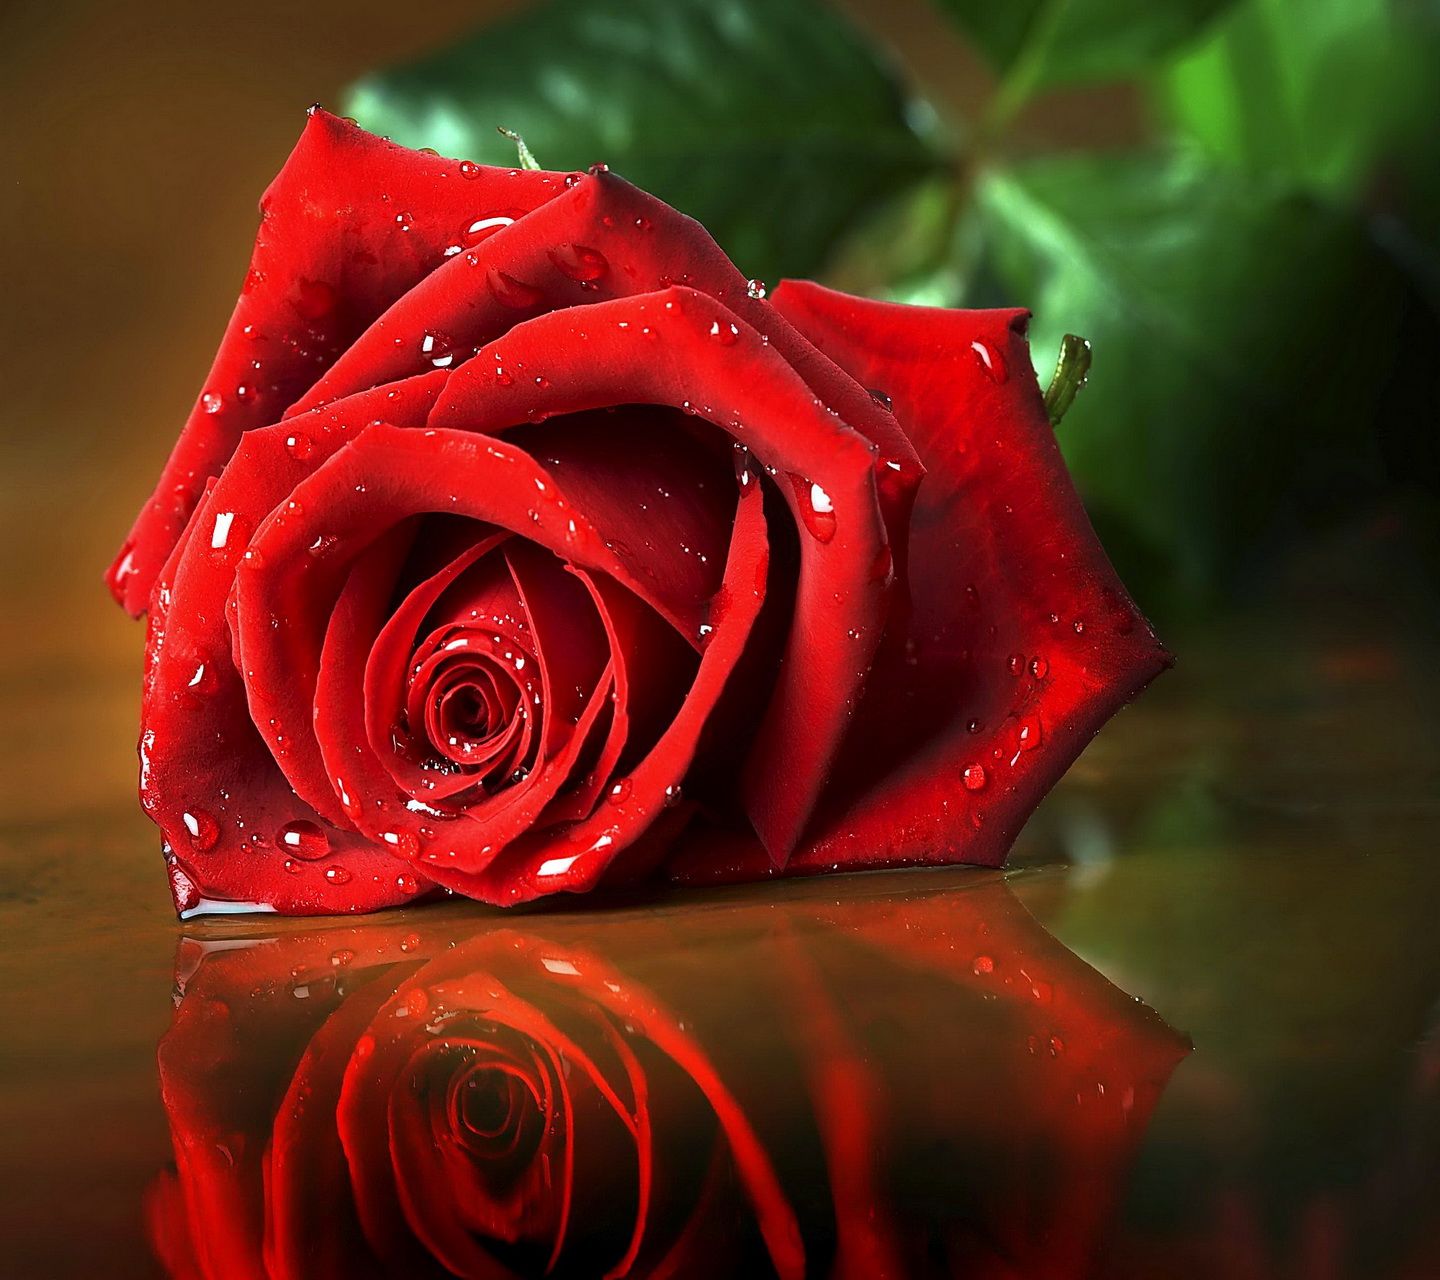 Mobile Wallpapers In Hd For Free Download - Red Rose Wallpaper Hd Download - HD Wallpaper 